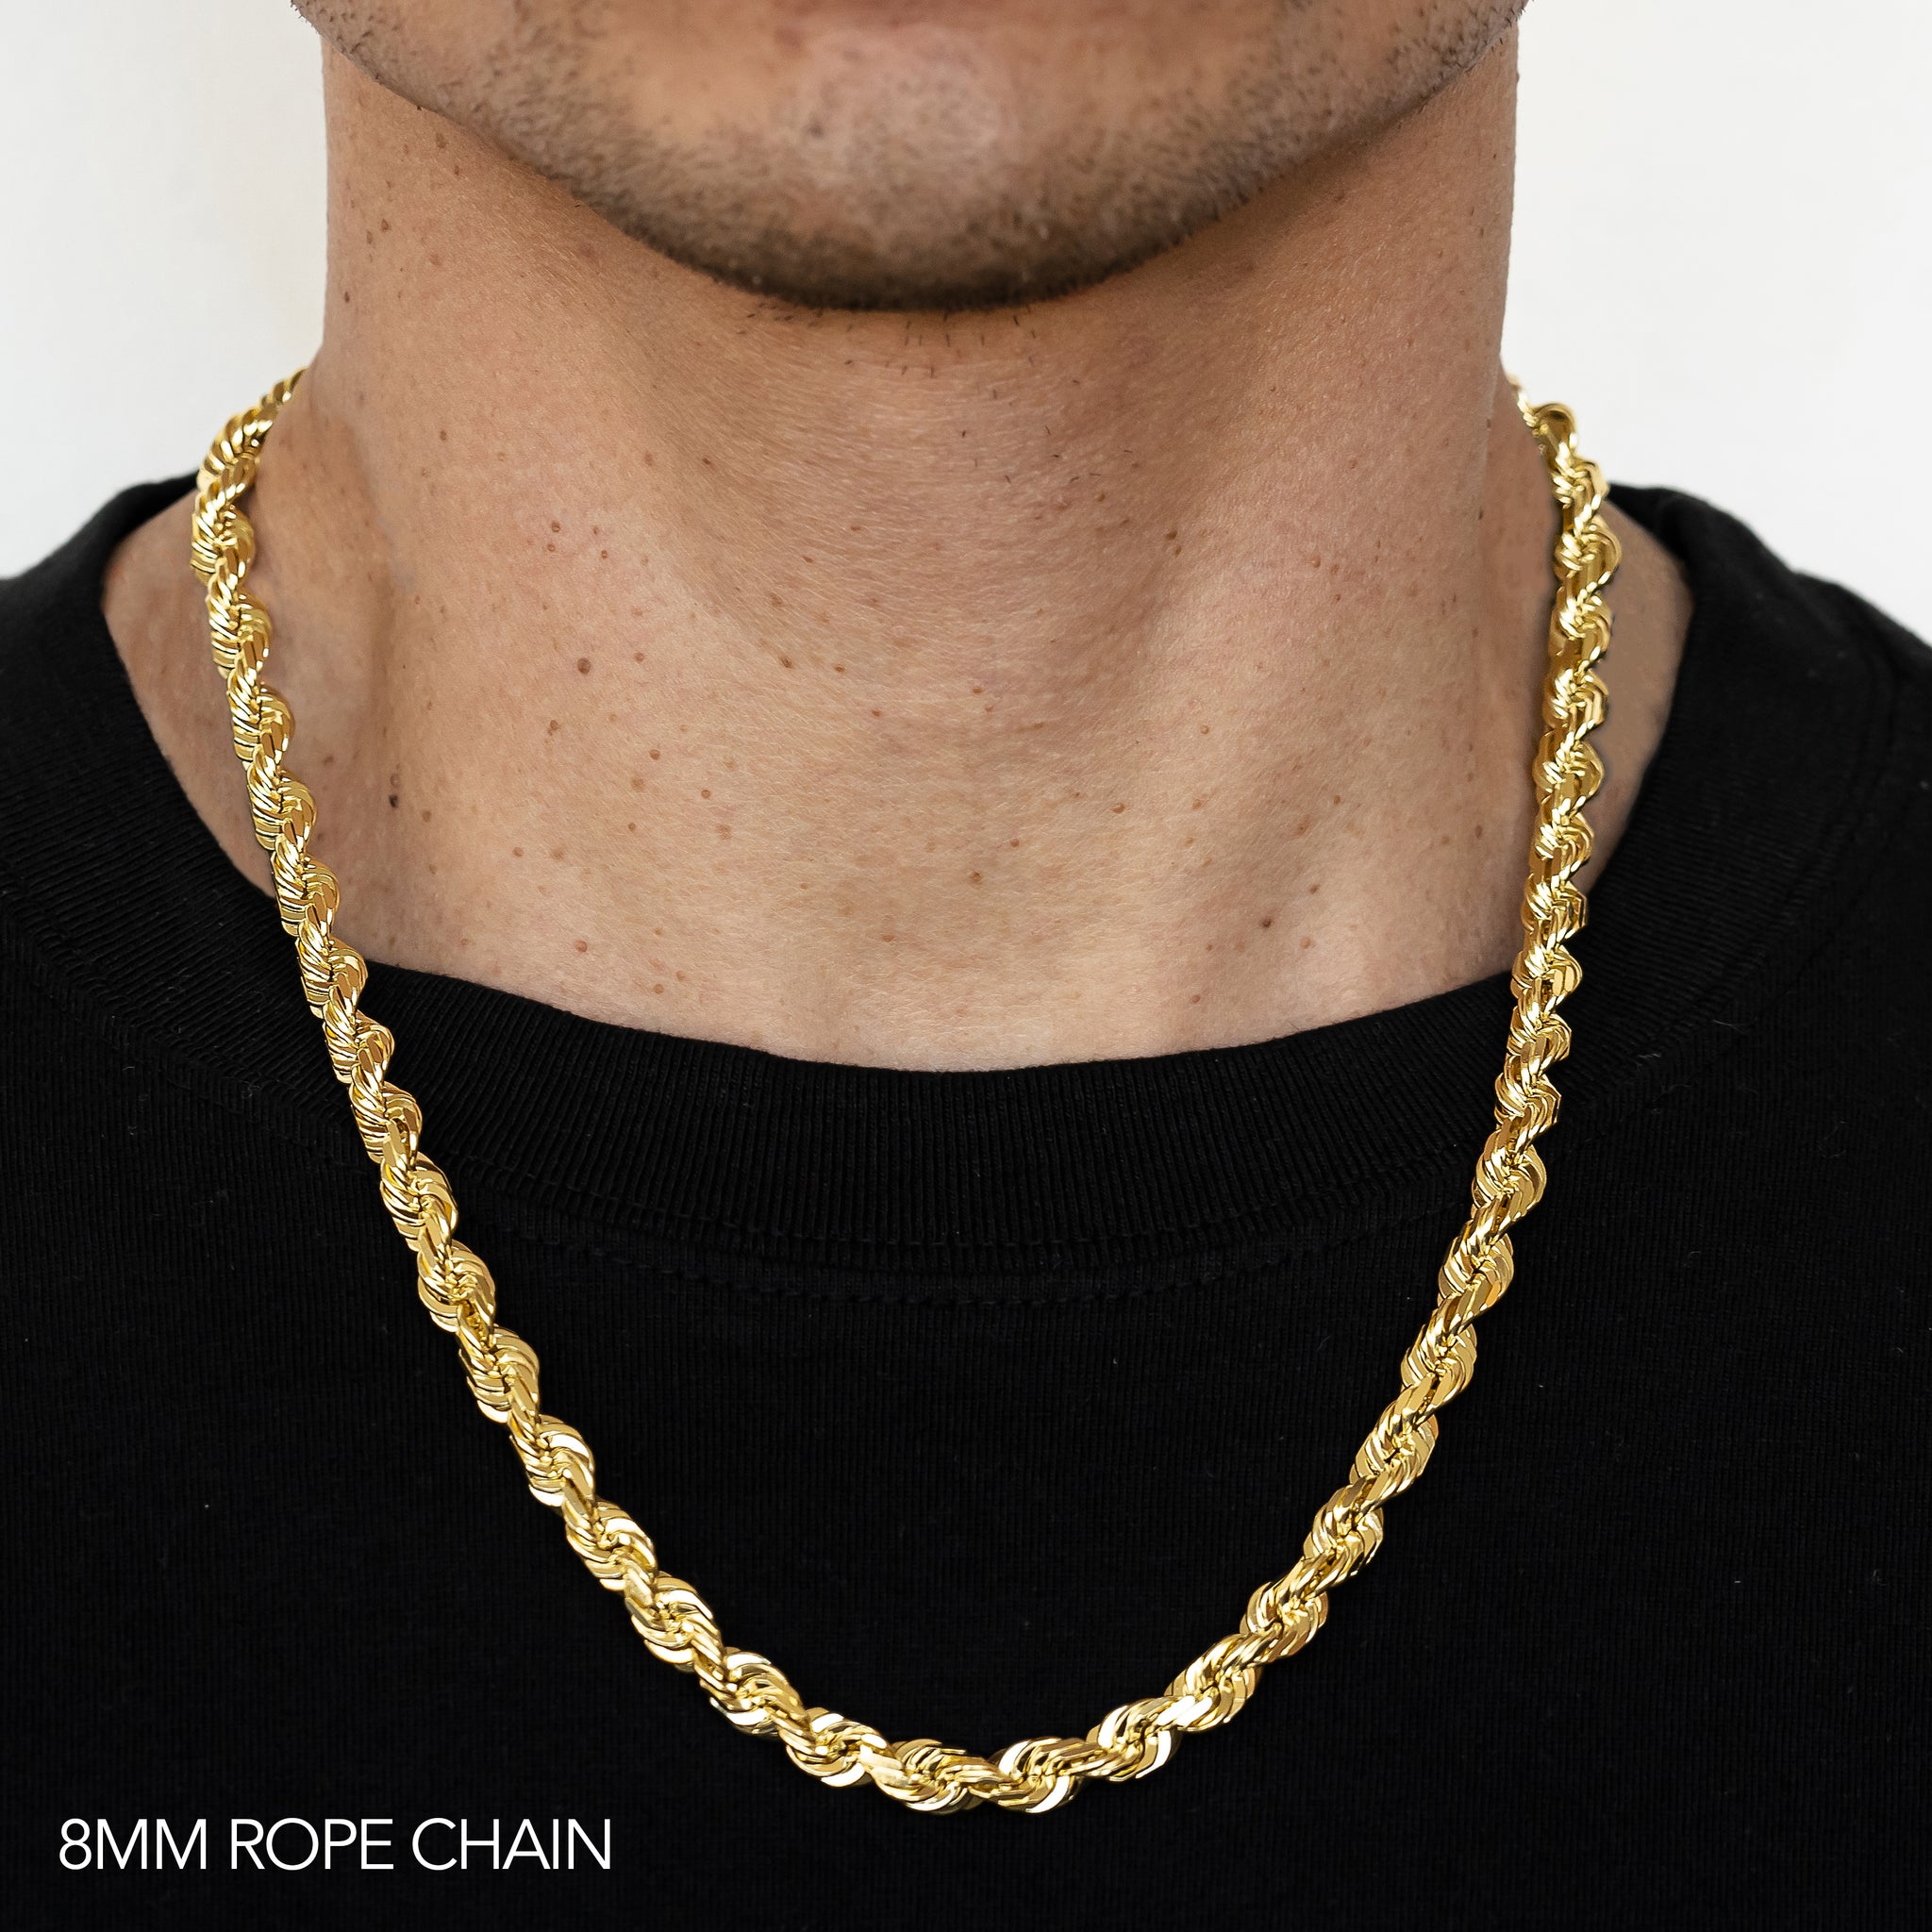 18K 8MM YELLOW GOLD SOLID DC ROPE 16" CHAIN NECKLACE (AVAILABLE IN LENGTHS 7" - 30")